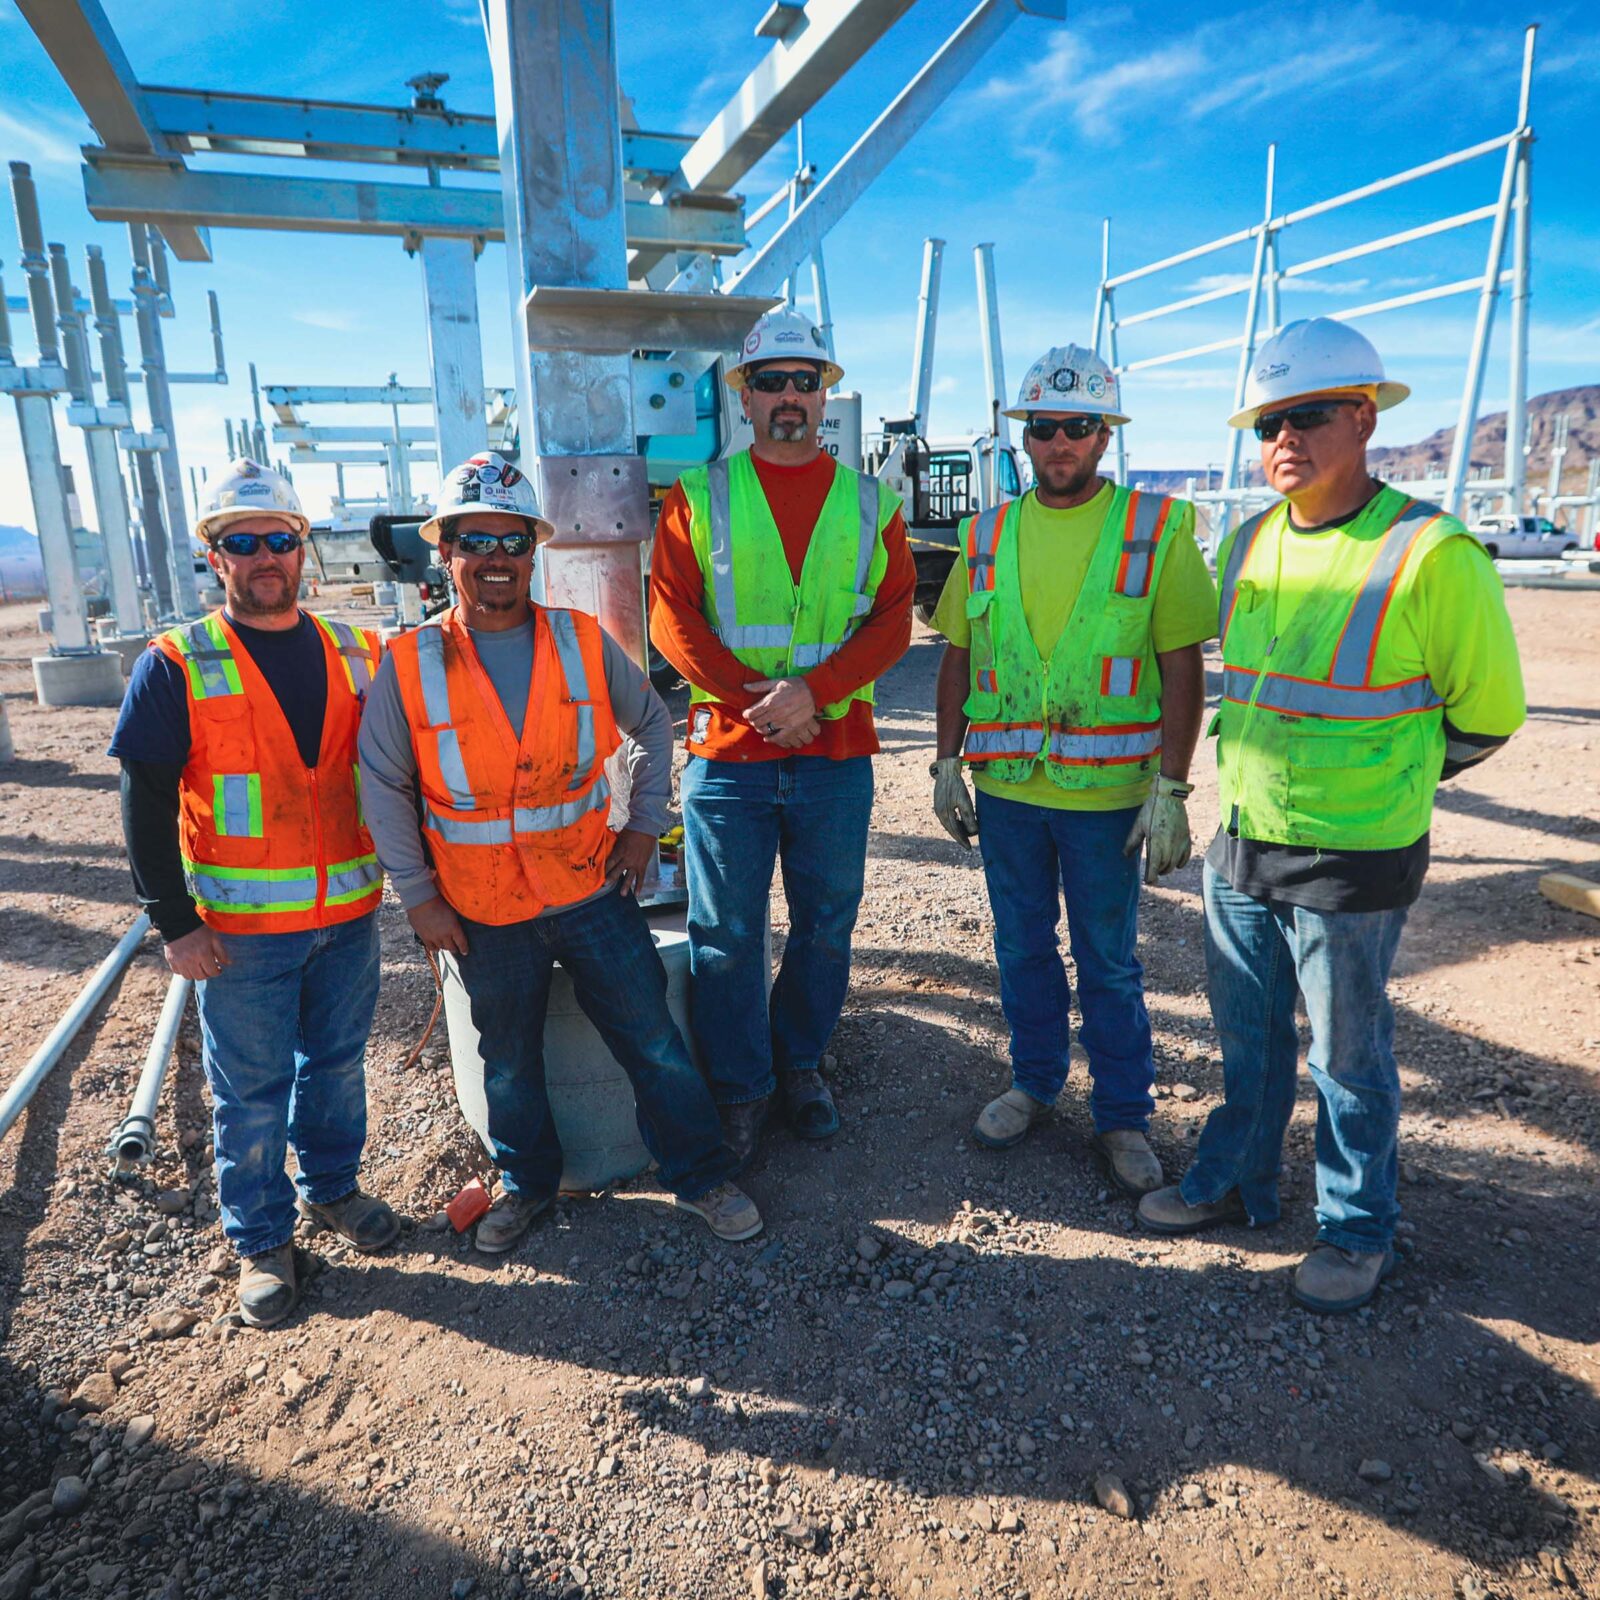 Group of workers smiling at a construction site